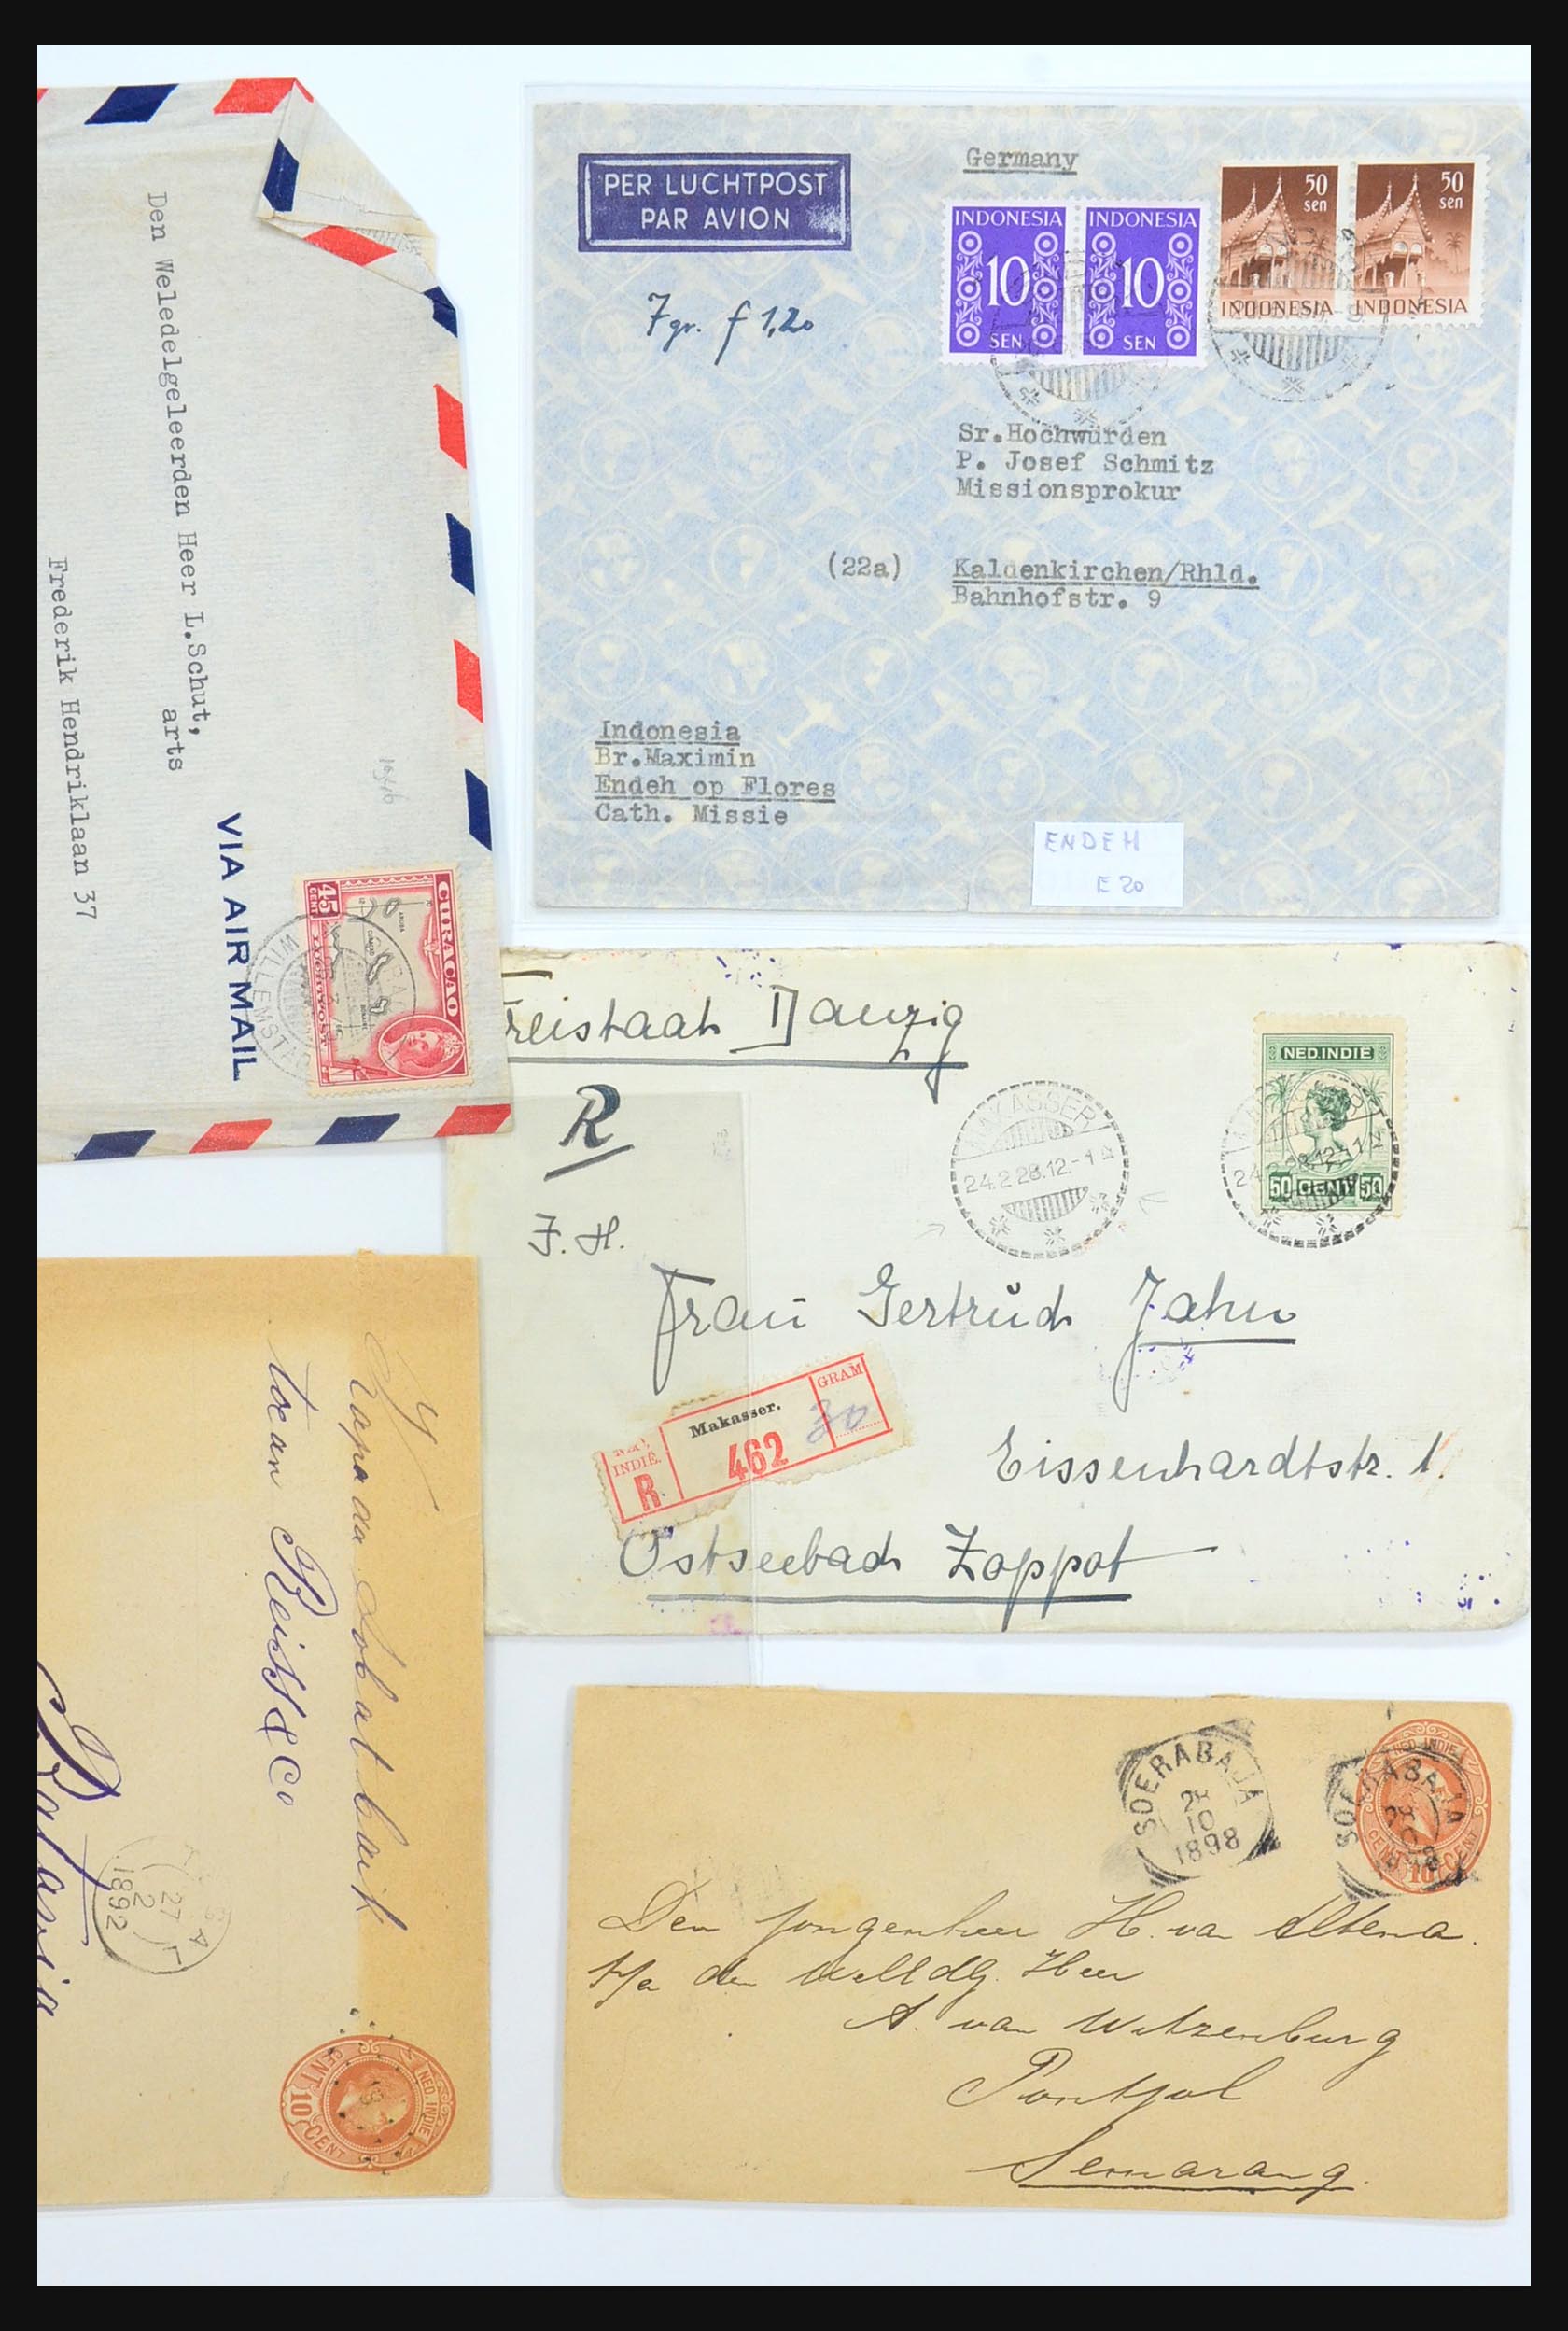 31361 035 - 31361 Netherlands Indies covers 1880-1950.